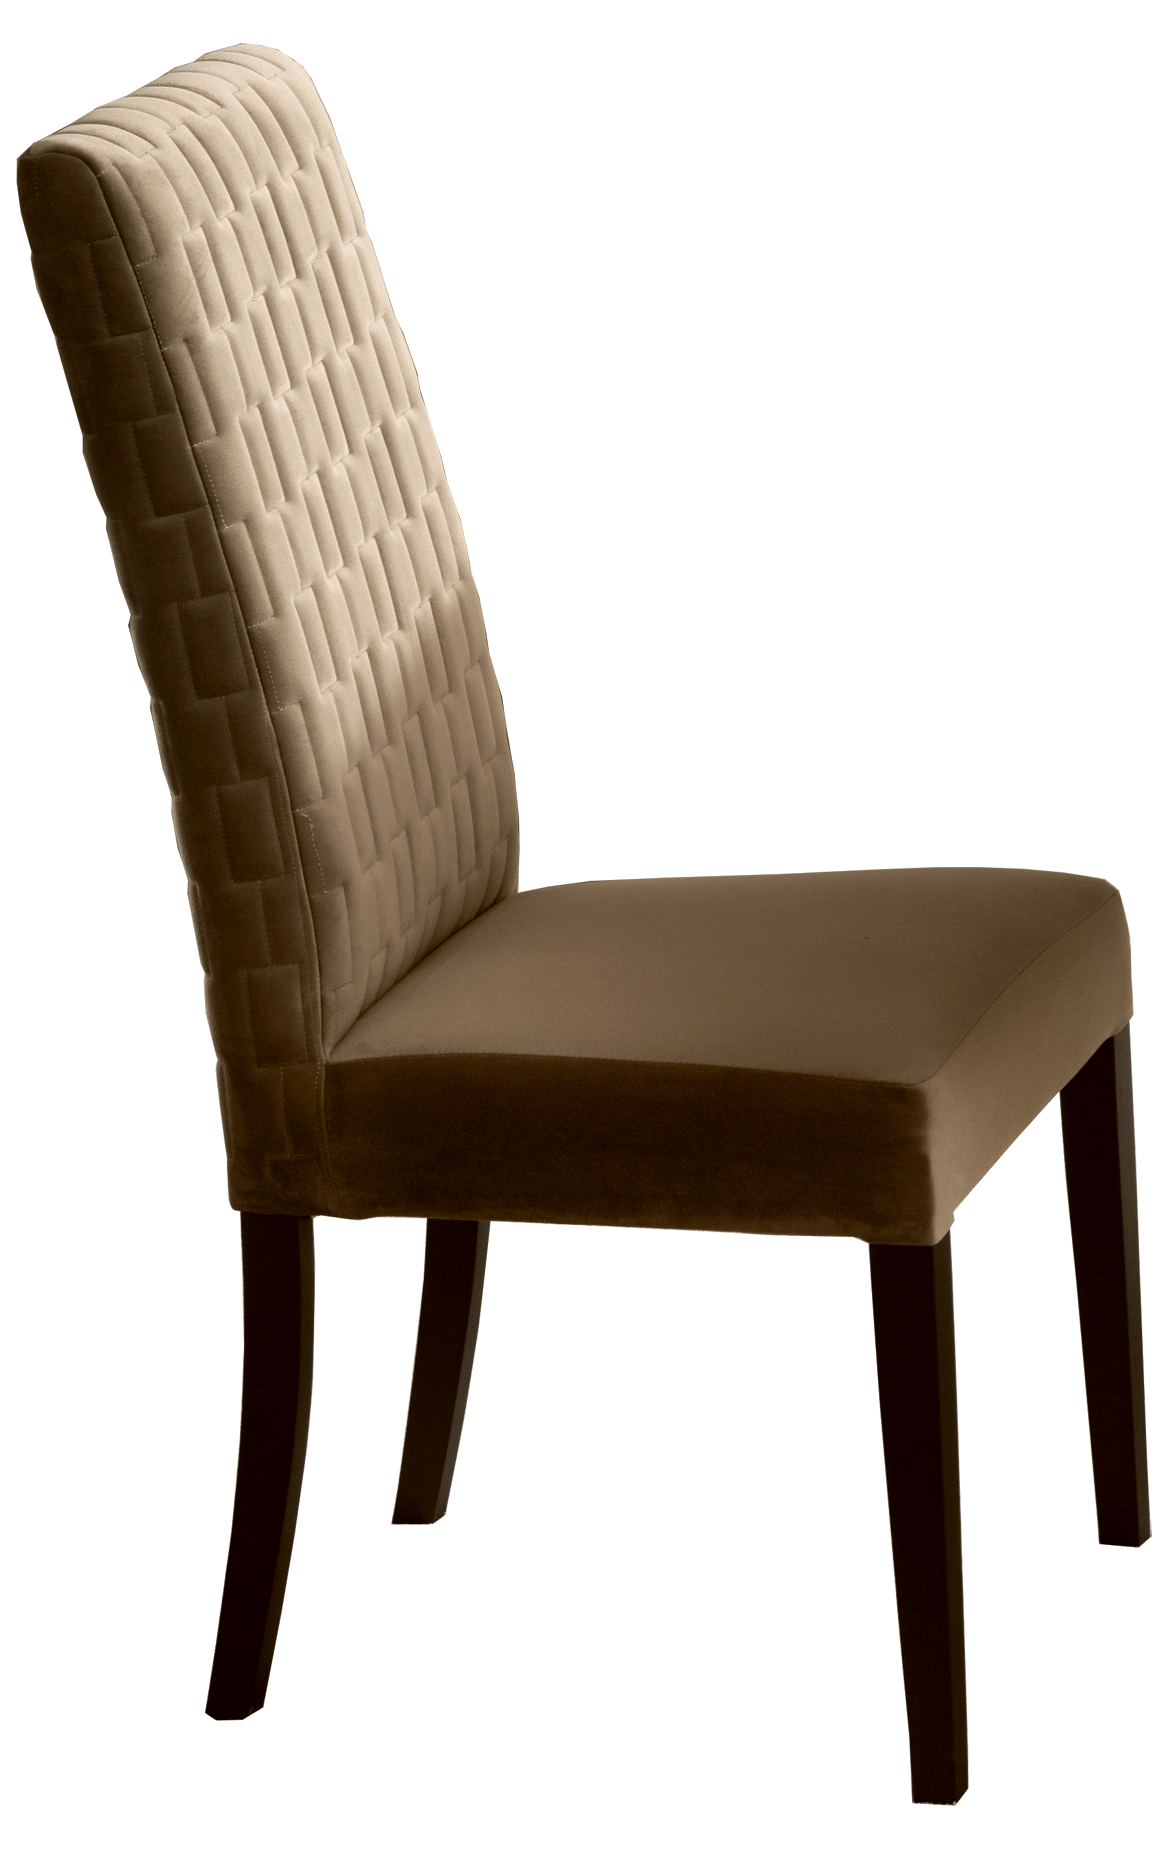 Brands Franco AZKARY II CONSOLES, Spain Poesia Dining Chair by Arredoclassic